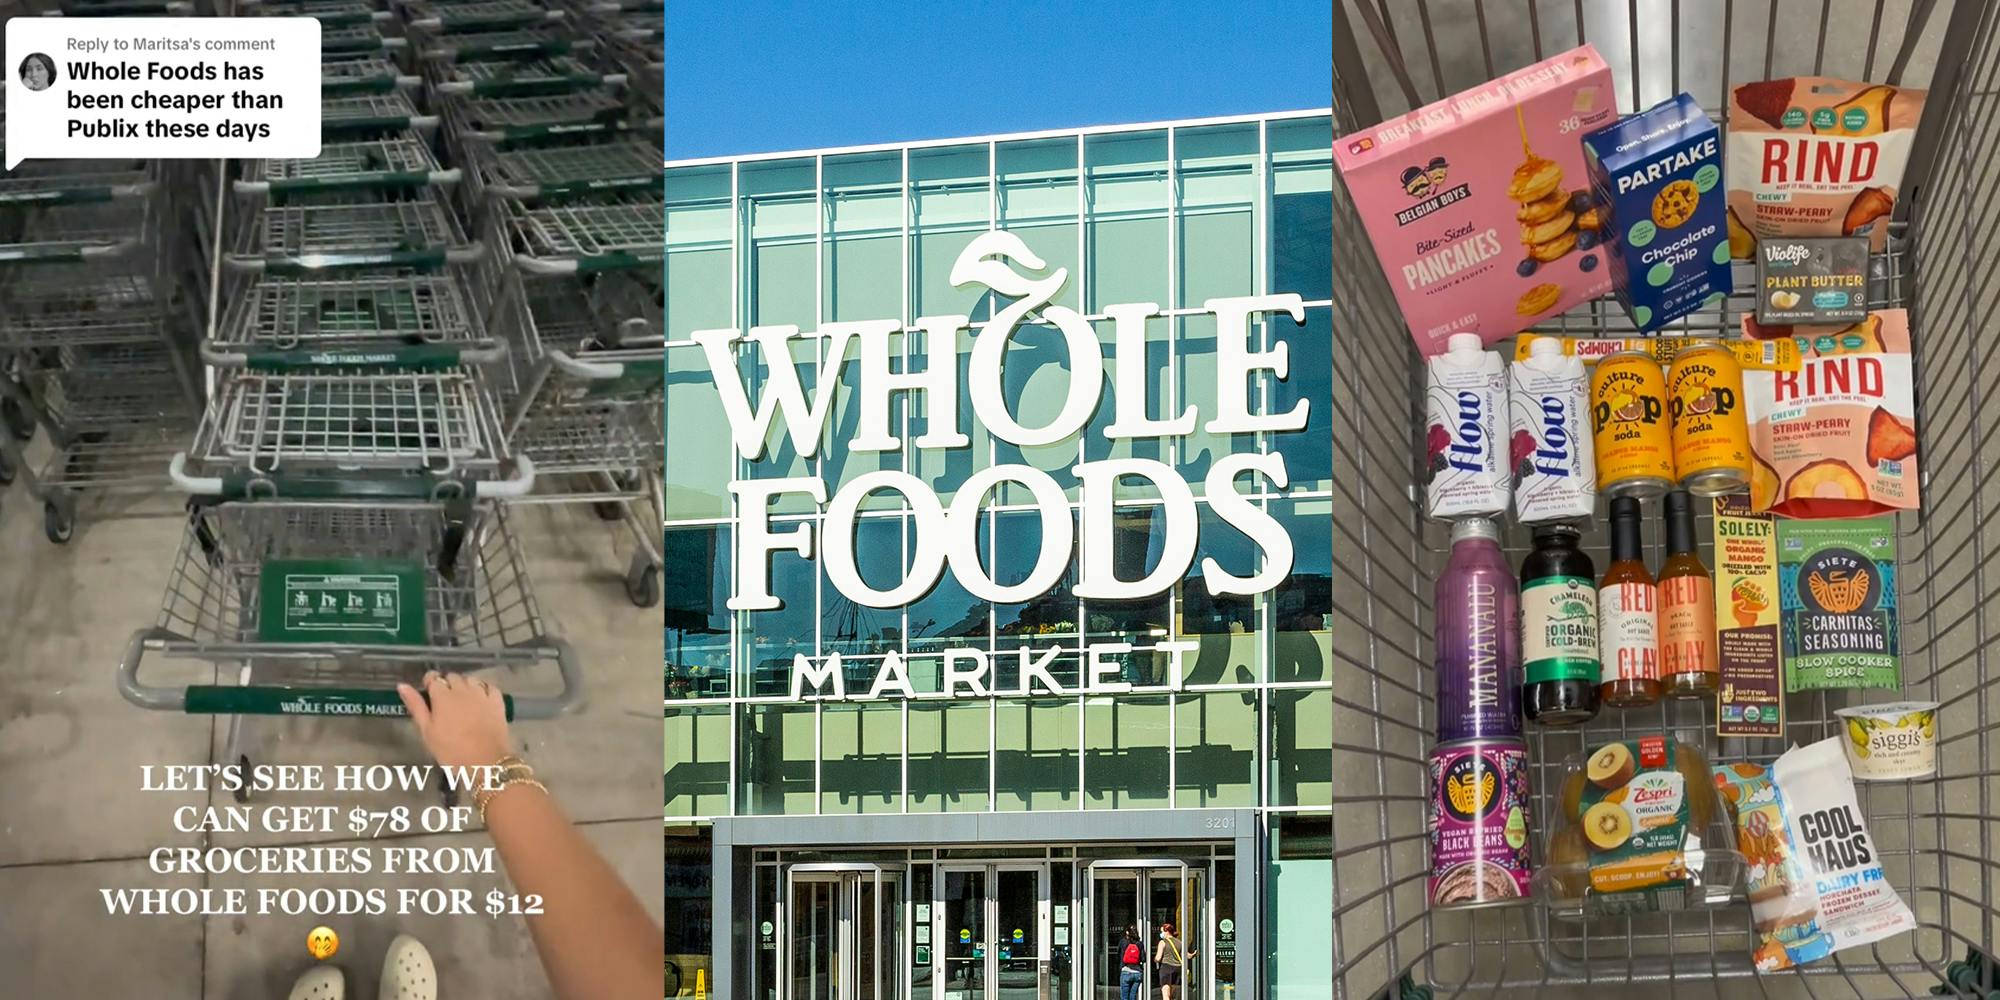 Woman pulling out shopping cart; Whole Food Markets Building Logo; Cart Filled with various store products